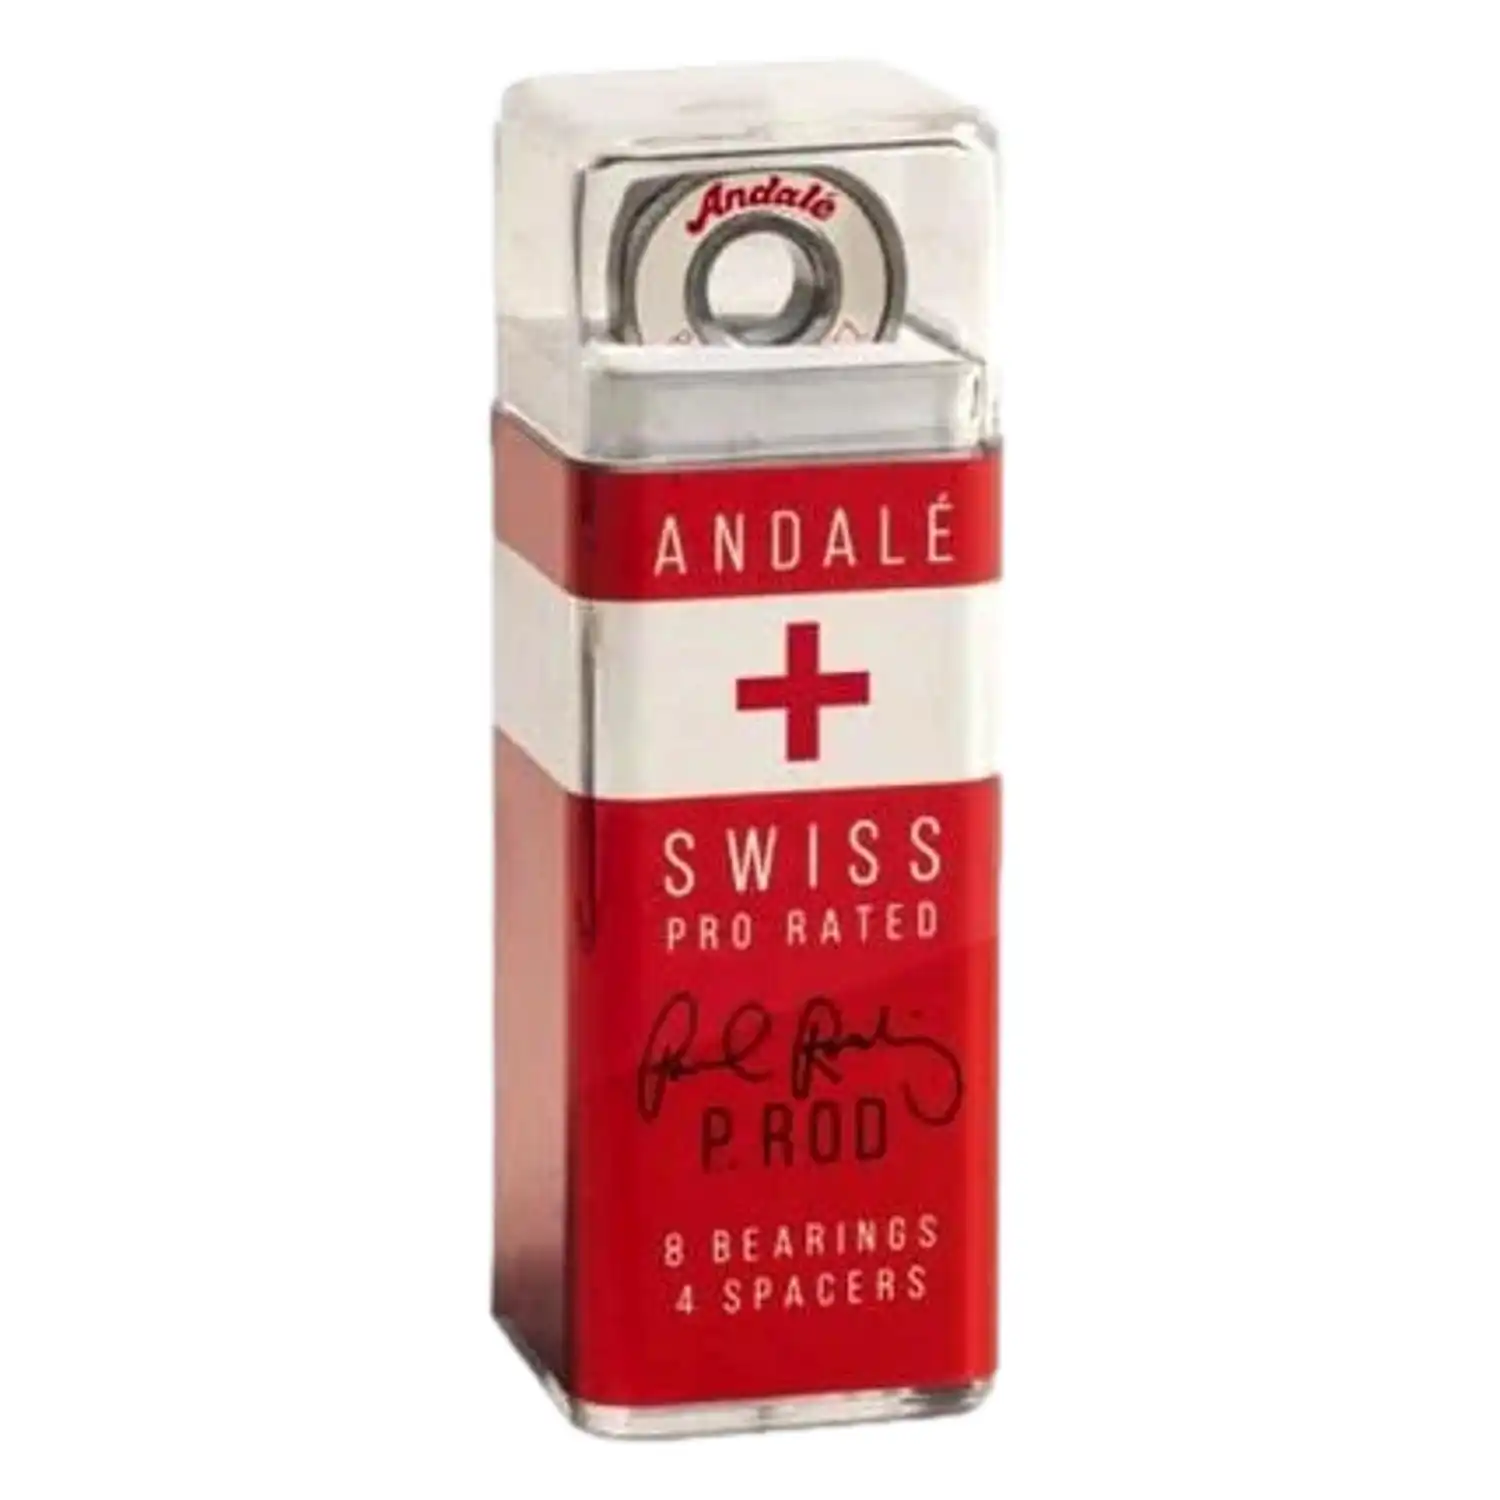 Andale Paul Swiss Rodriguez pro rated bearings